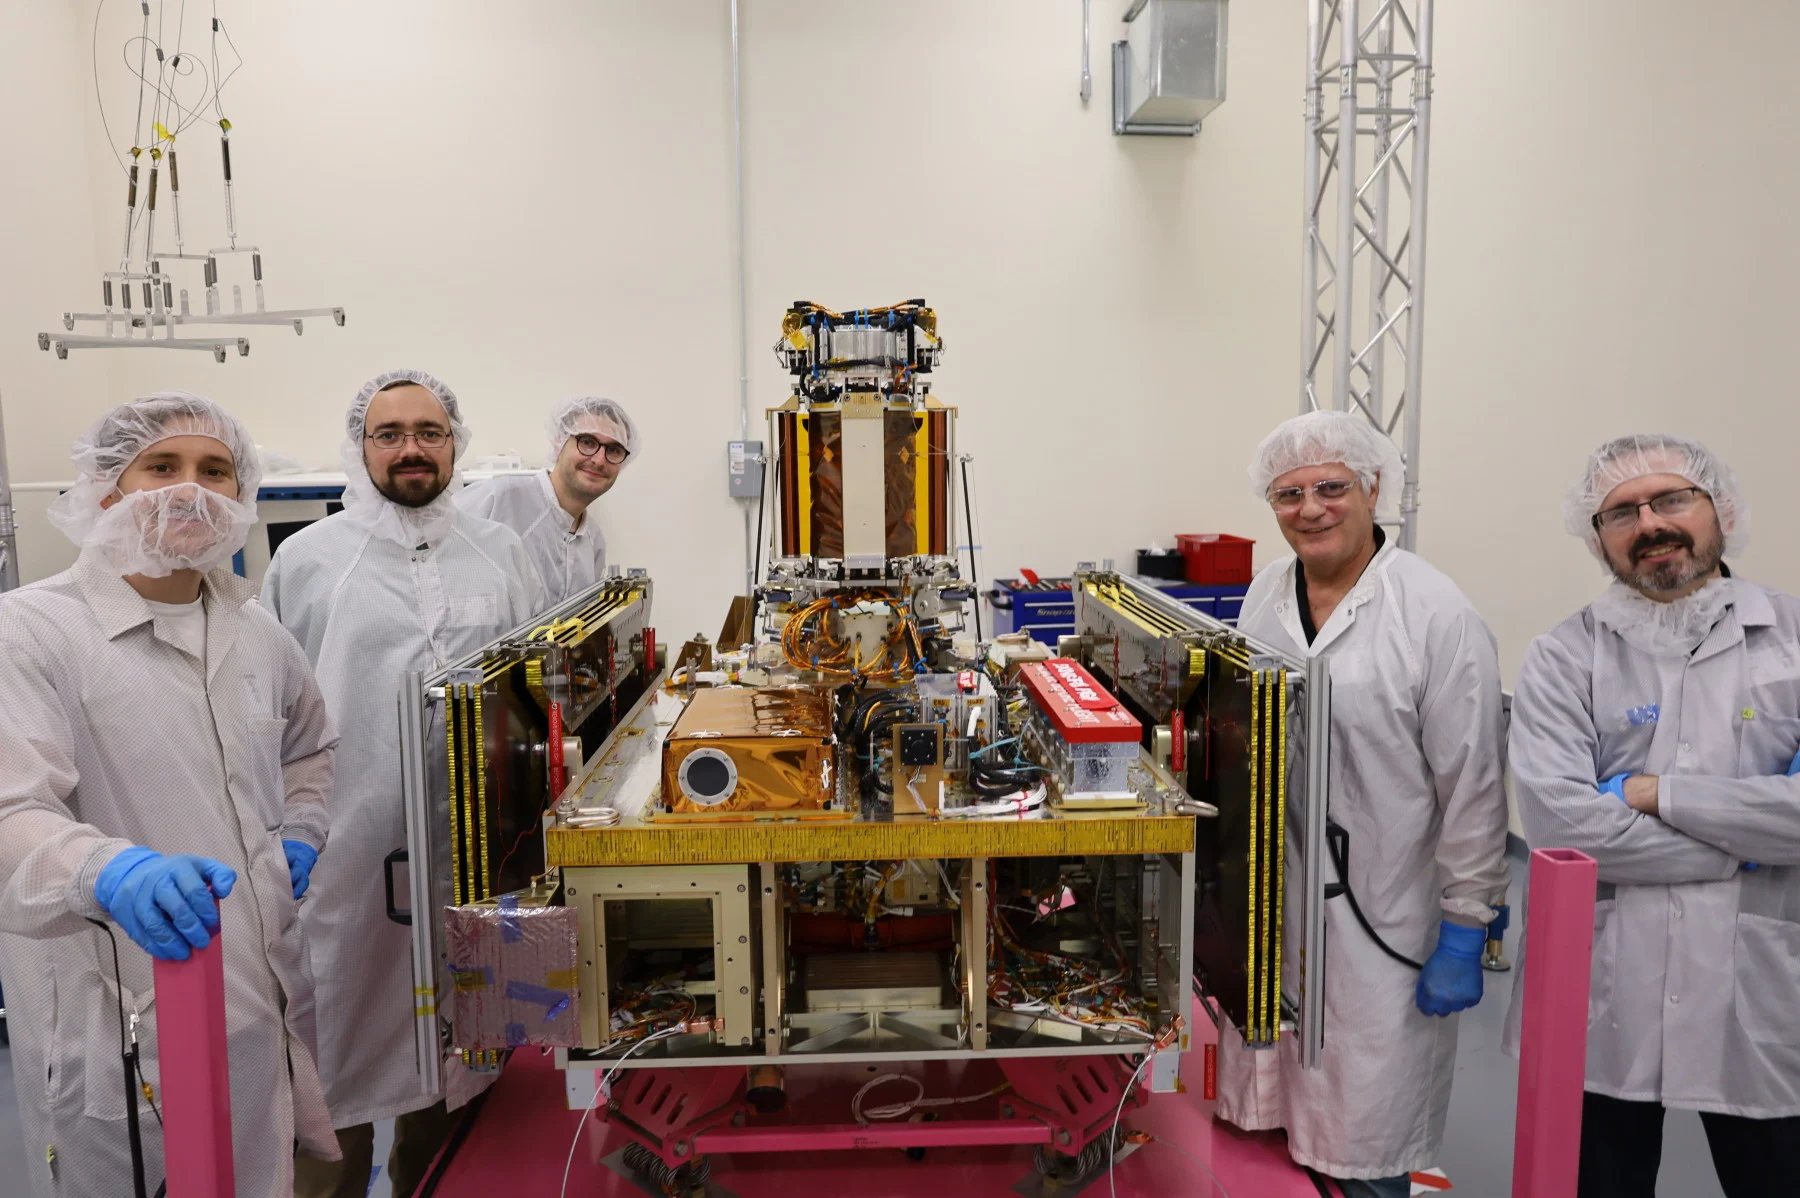 Scientists posing with the Momentus Vigoride spacecraft. (California Institute of Technology)